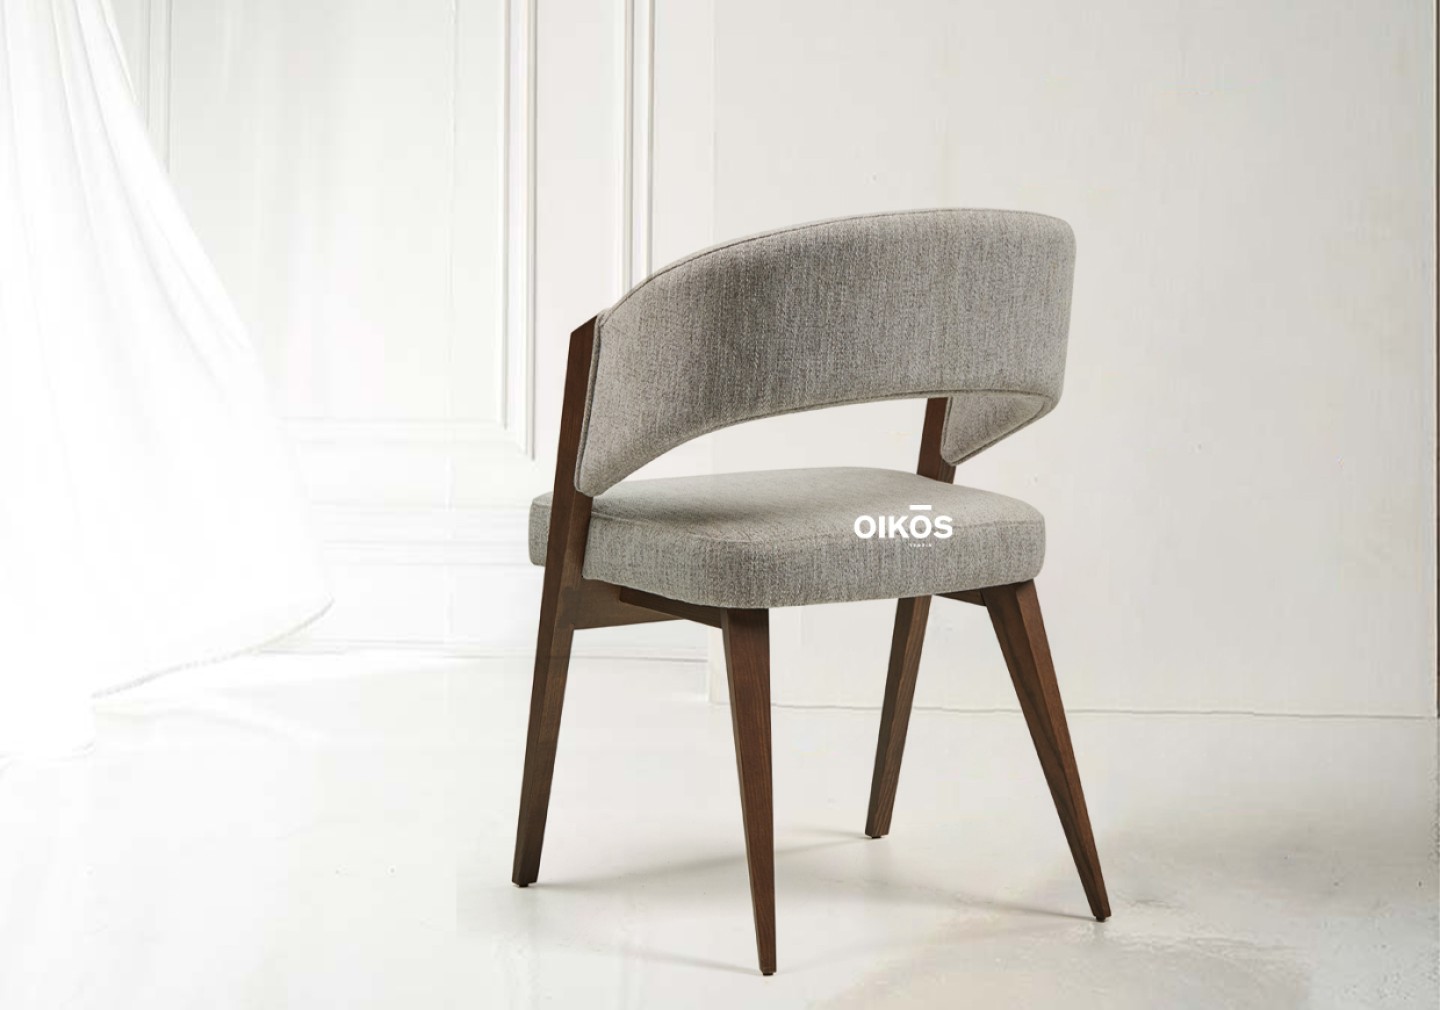 THE CONNOR DINING CHAIR